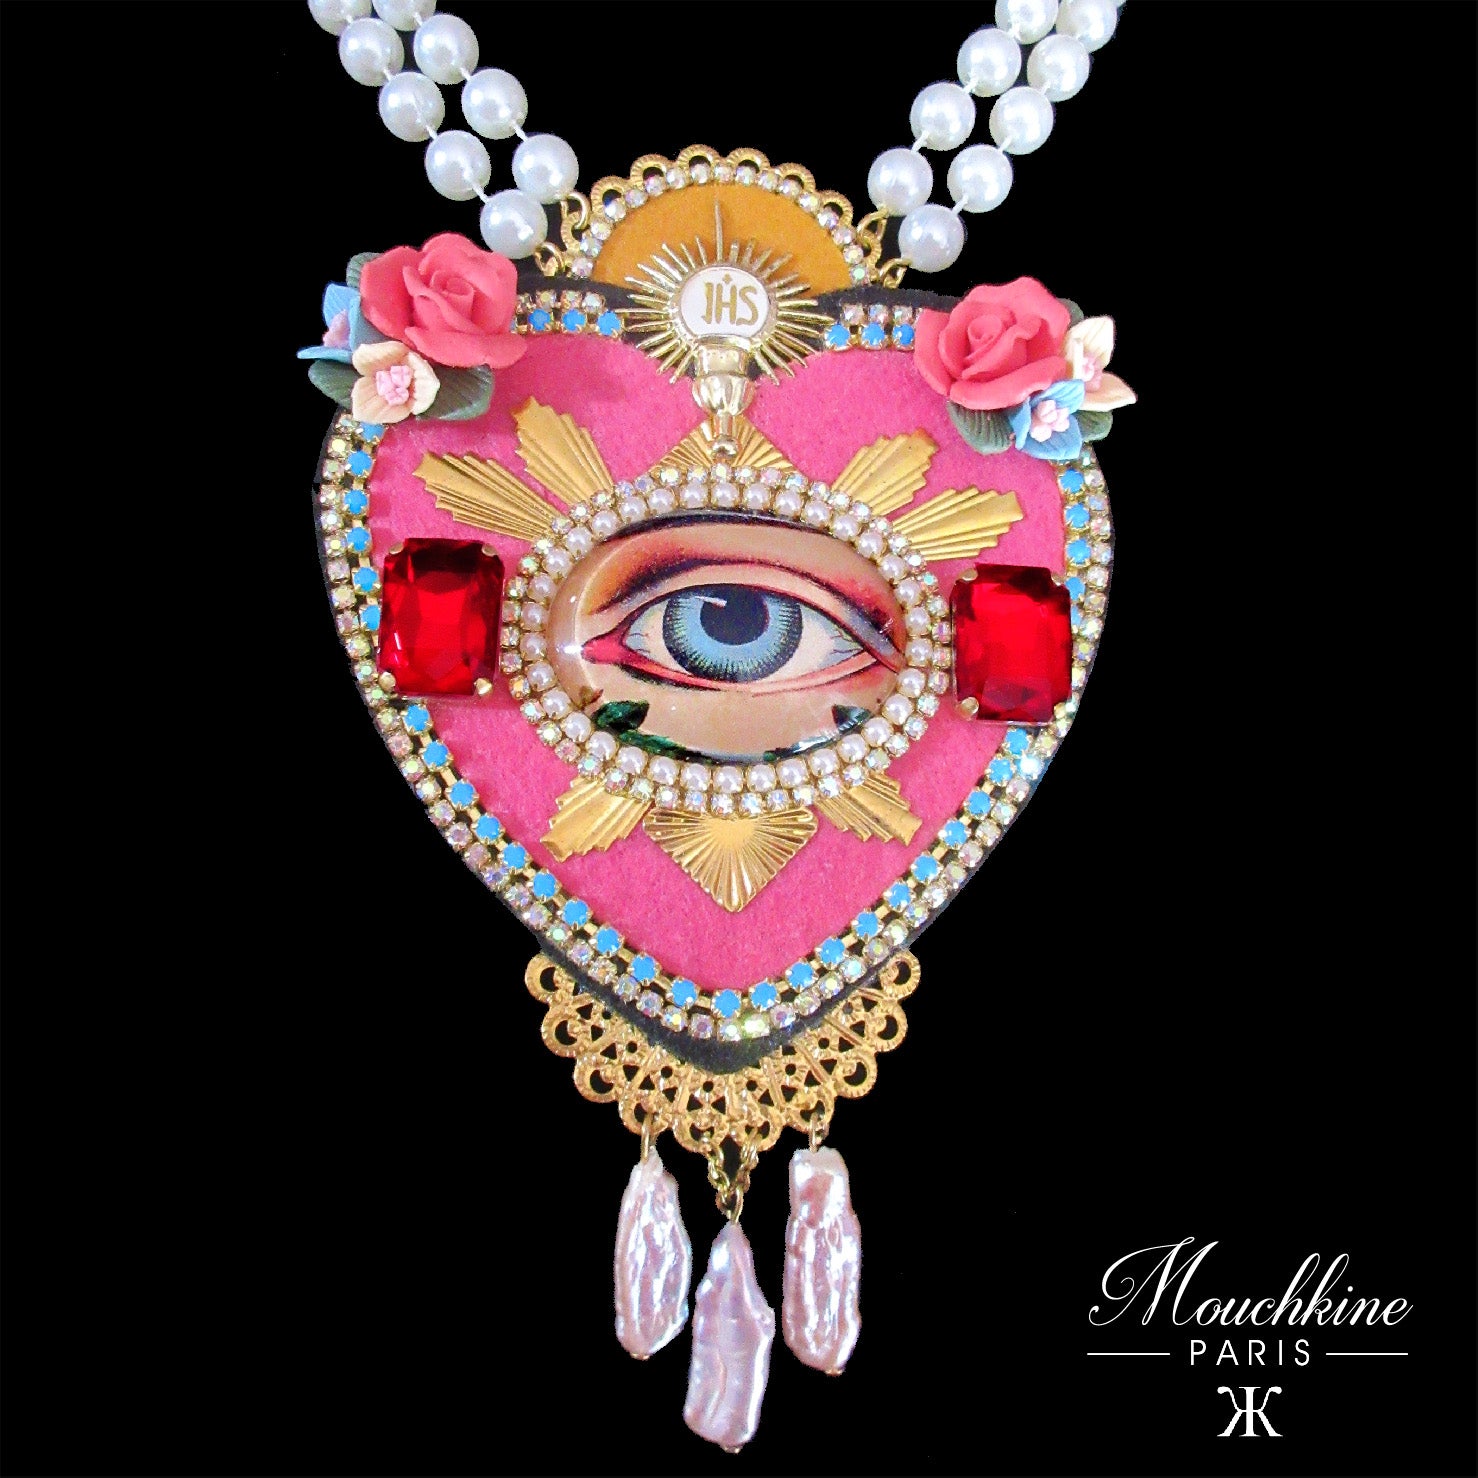 mouchkine jewelry couture pink heart with a center vintage eye necklace